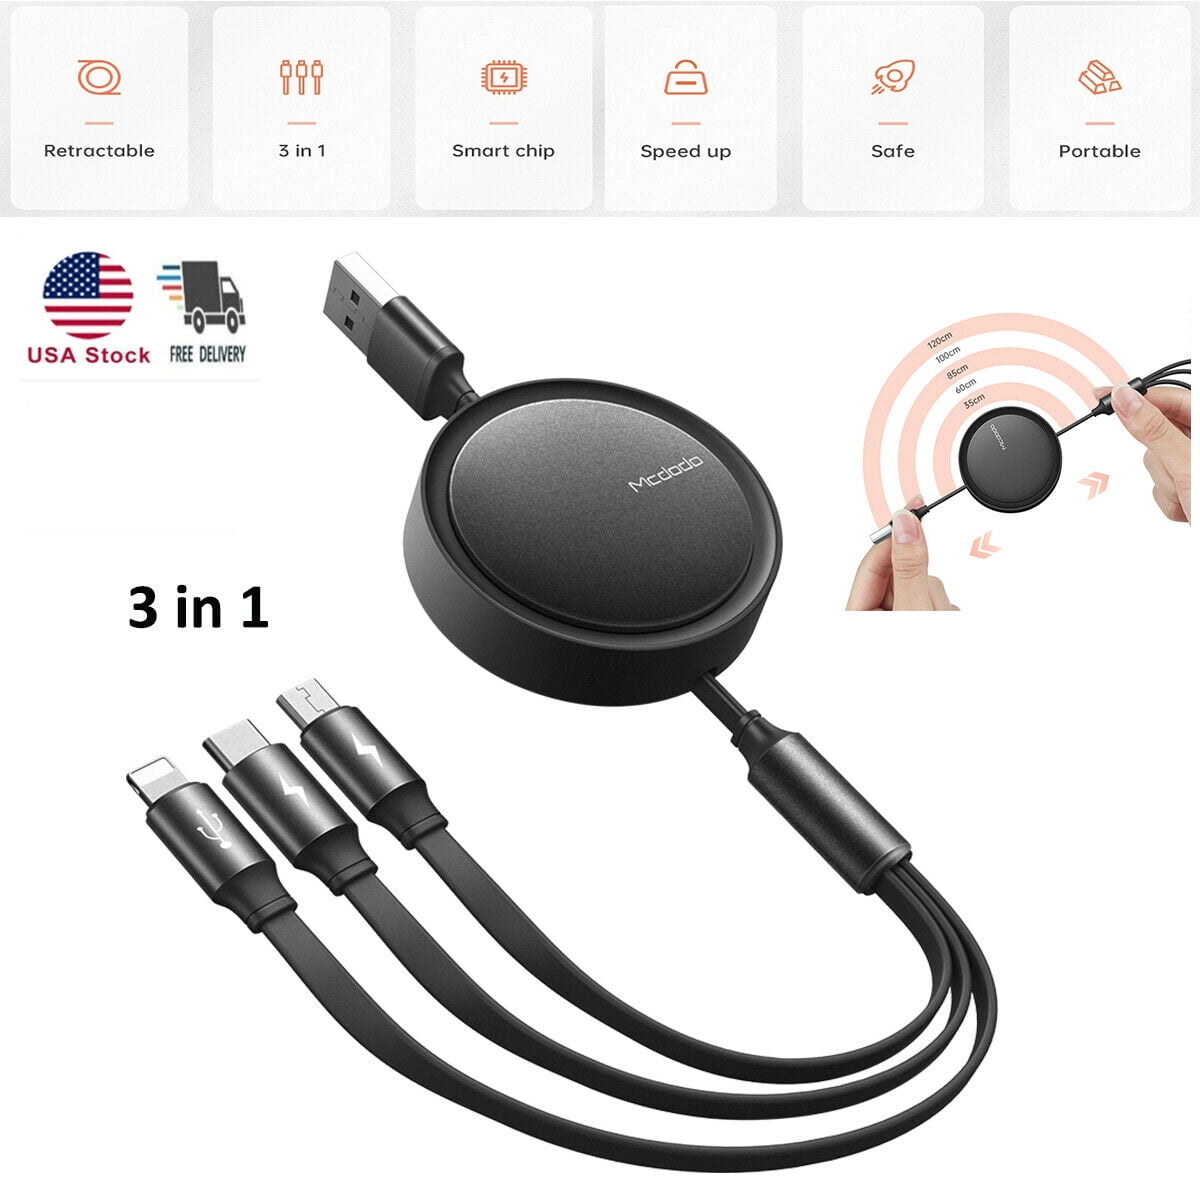 3-in-1 Retractable USB Charger Cable Cord Blue Piano Fast Charging Washable Charging Cord Adapter Compatible with Cell Phones Tablets Universal Use 